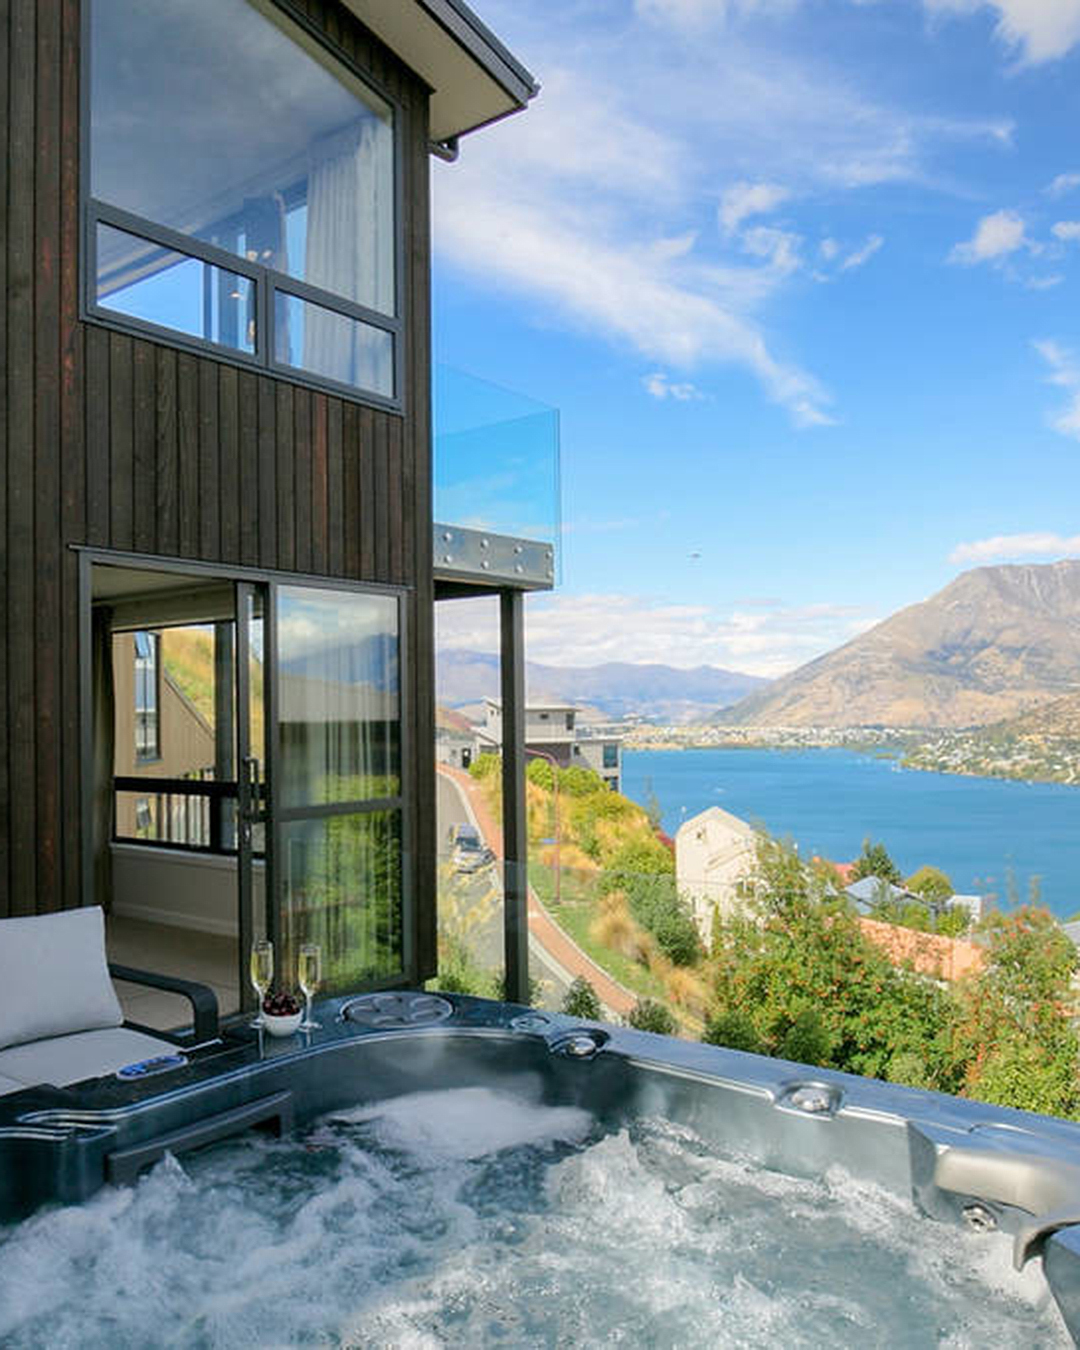 A hot tub in the foreground with a stunning Queenstown backdrop in the background.